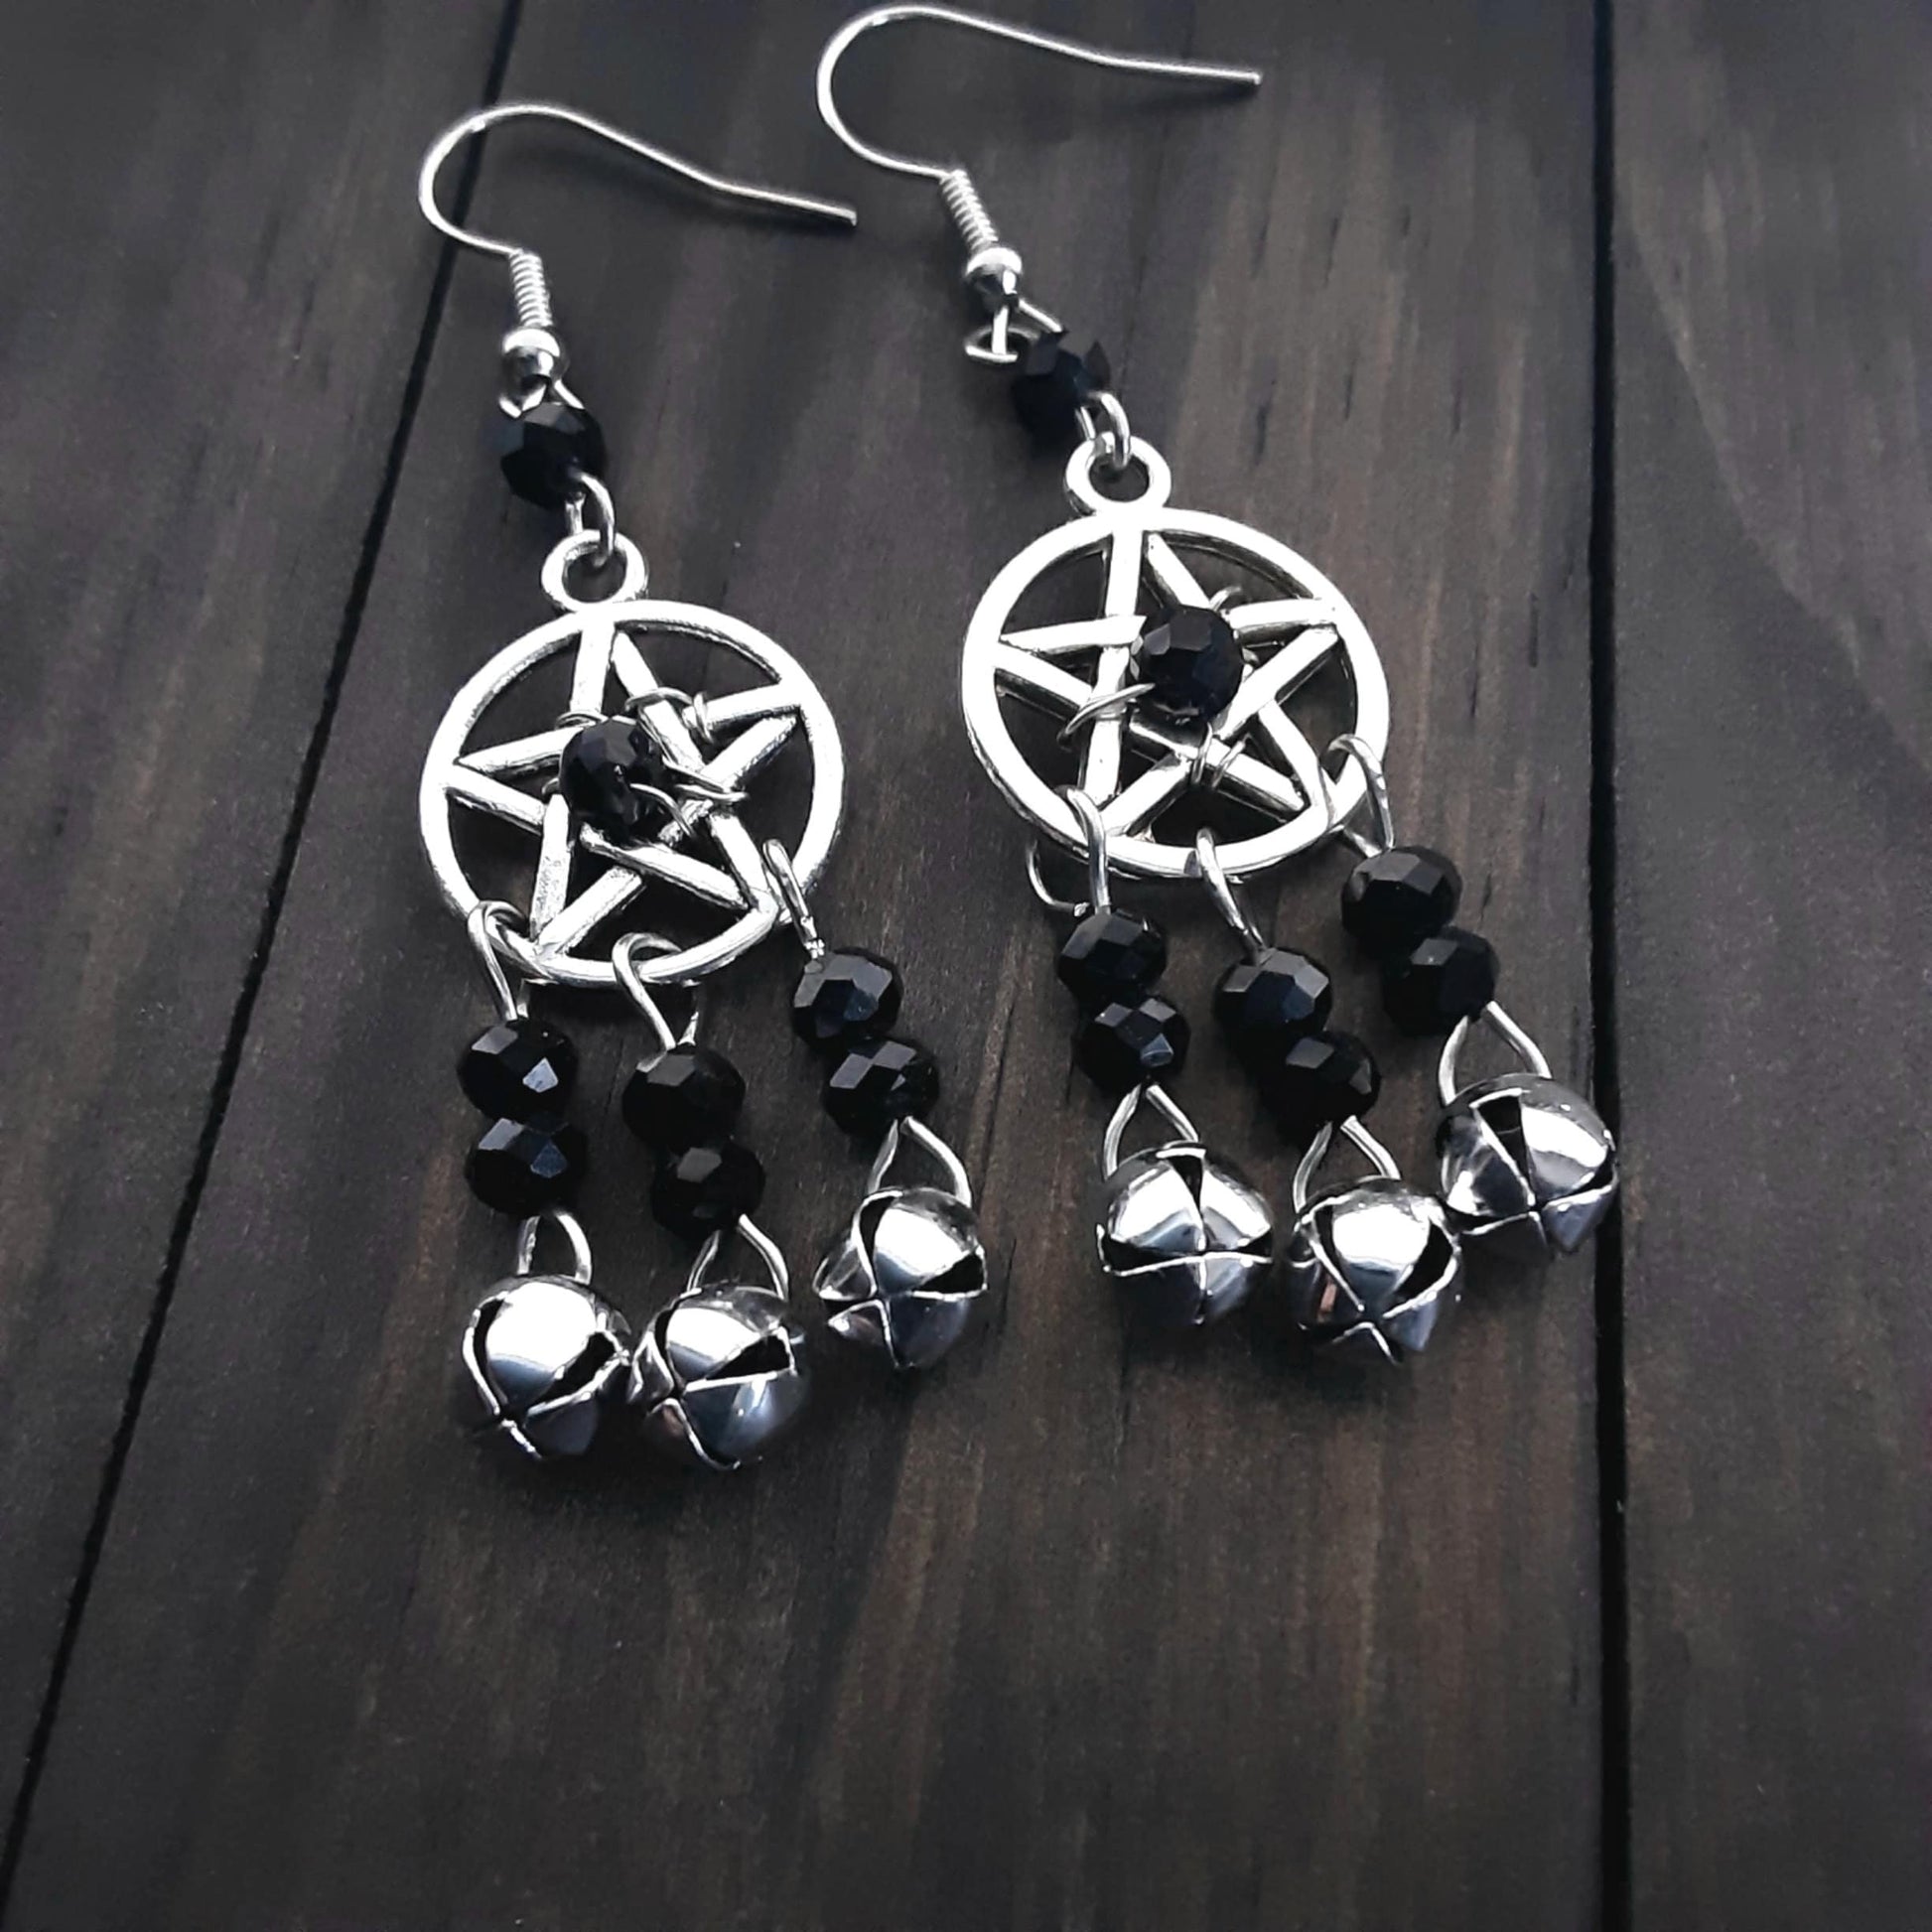 Pentacle earrings with black crystals and bells on wooden background